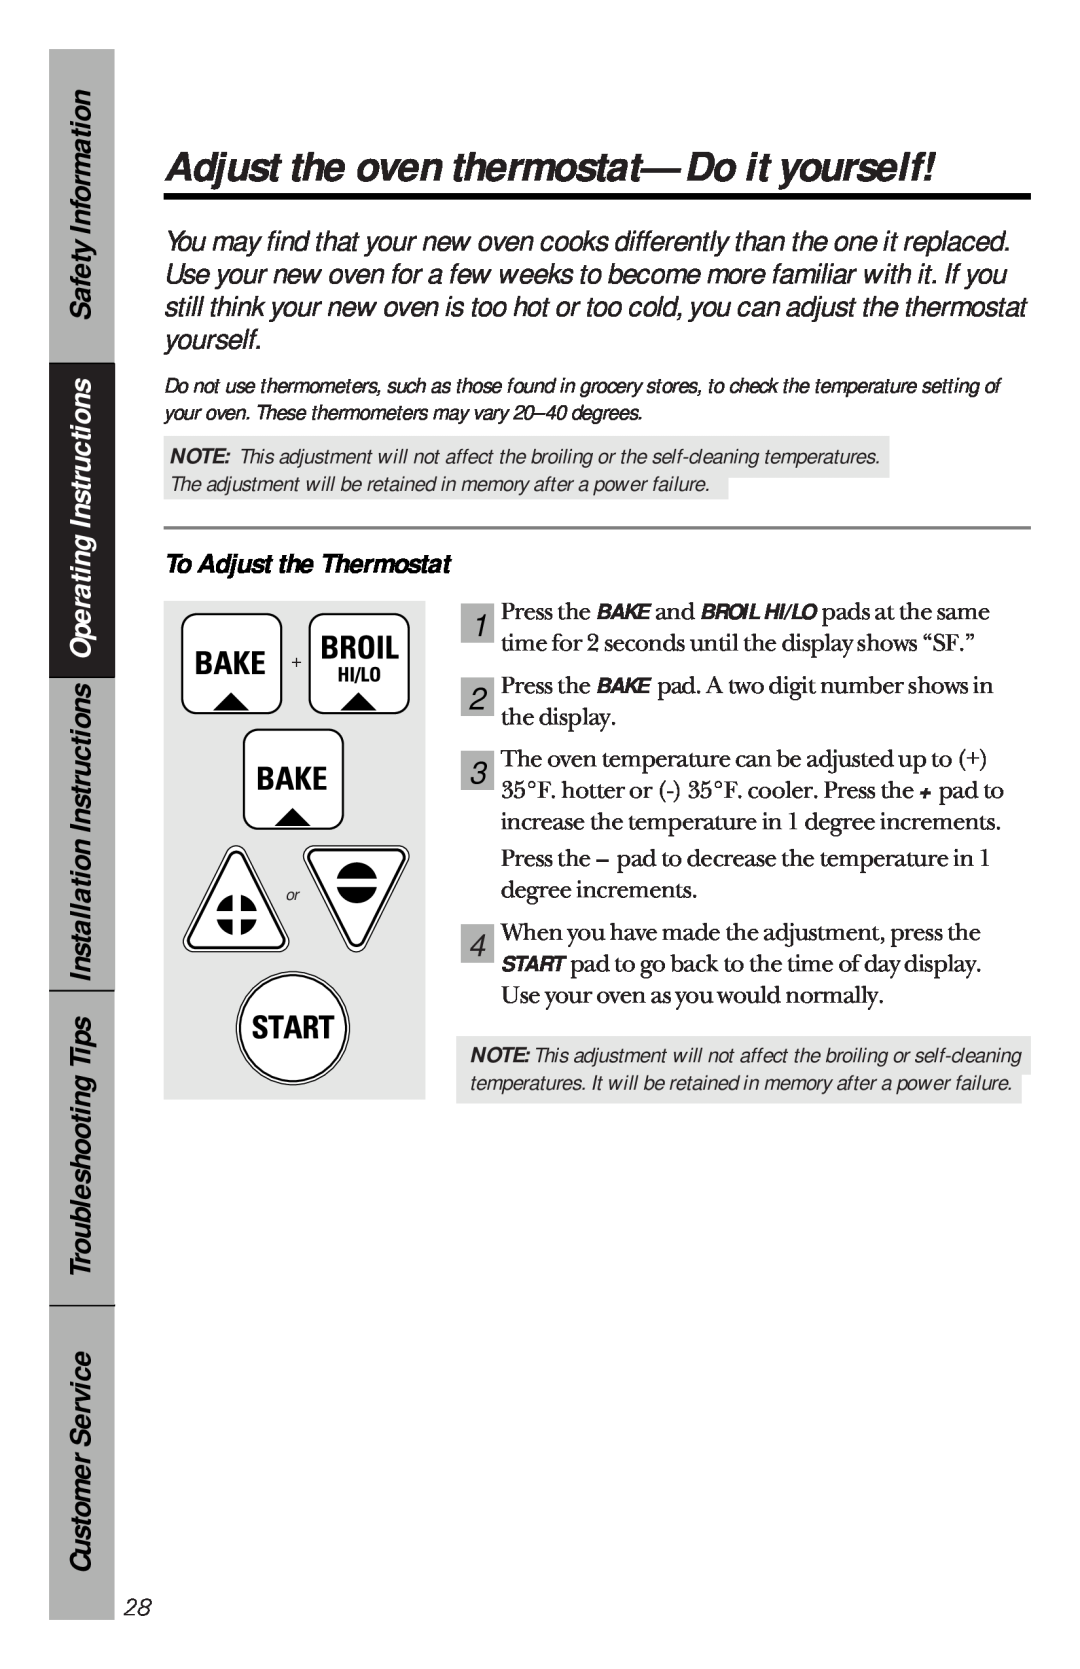 GE 49-8827 owner manual Adjust the oven thermostat-Doit yourself, Instructions Safety Information, To Adjust the Thermostat 